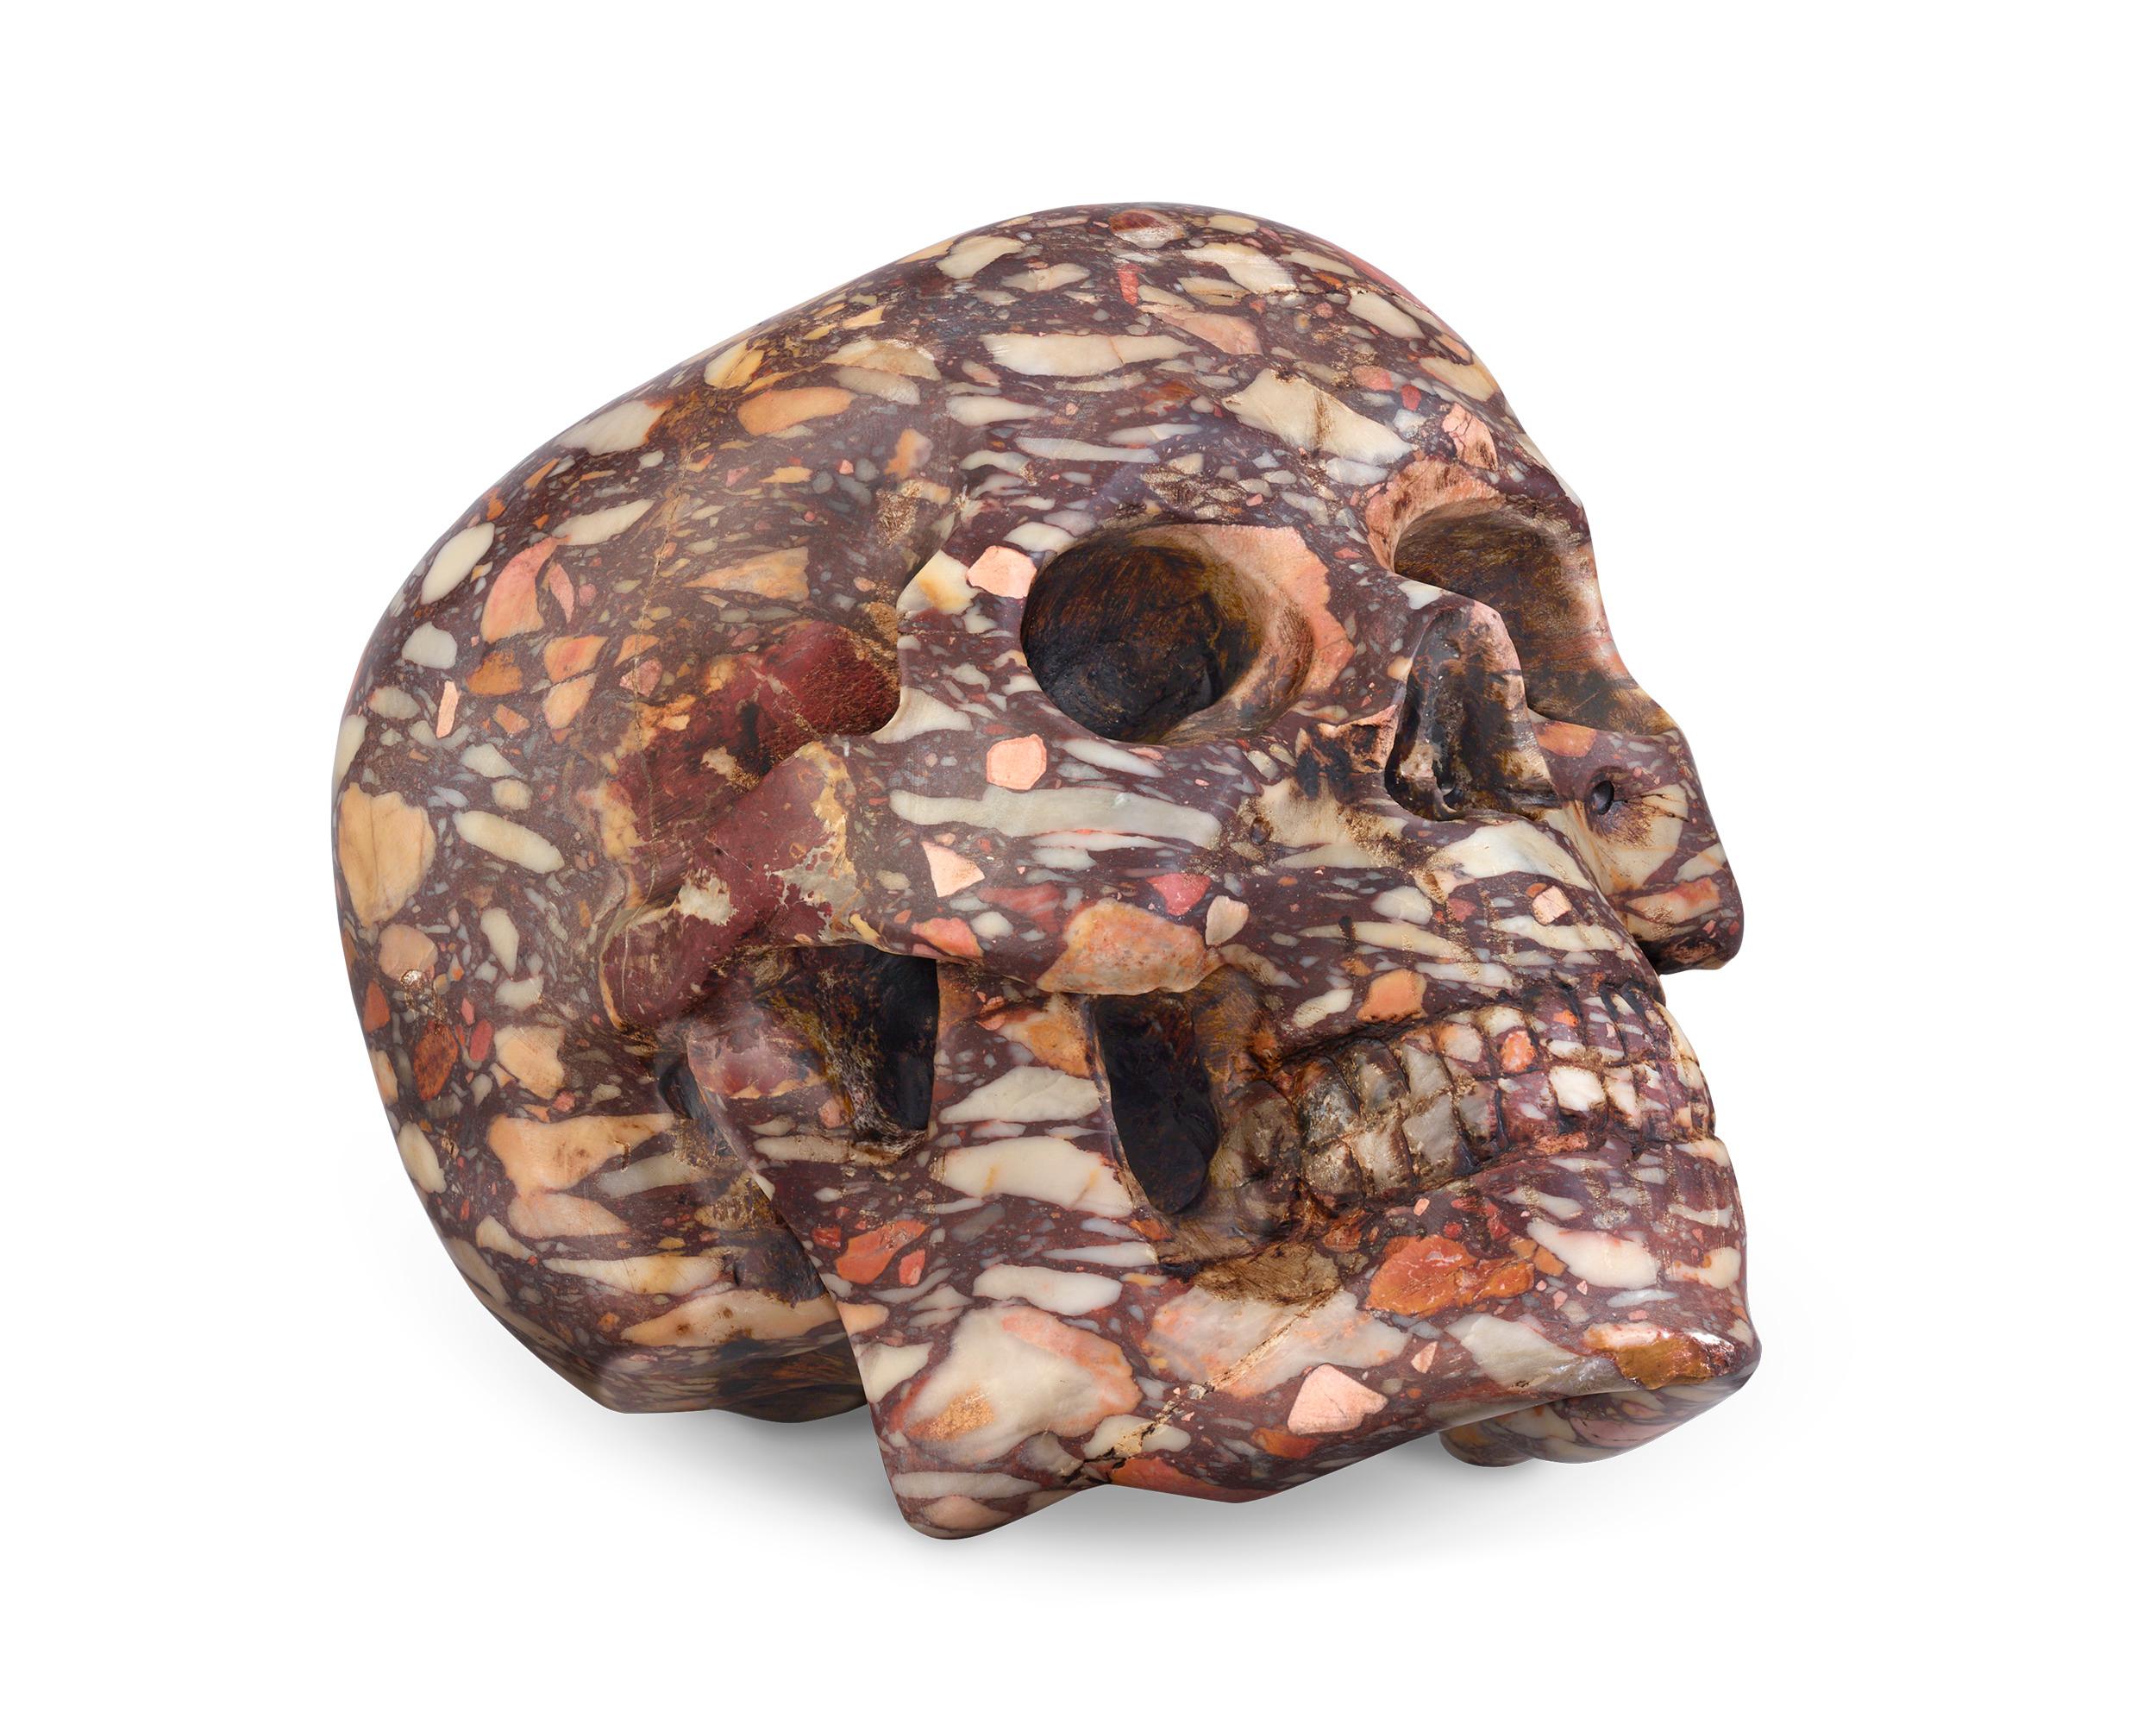 This fascinating carving of a human skull is formed from a specimen of Breccia di Skiros, a dynamic, multicolored marble quarried in Italy. This exceptionally detailed example of lapidary work is magnificently crafted, from the well-formed teeth to